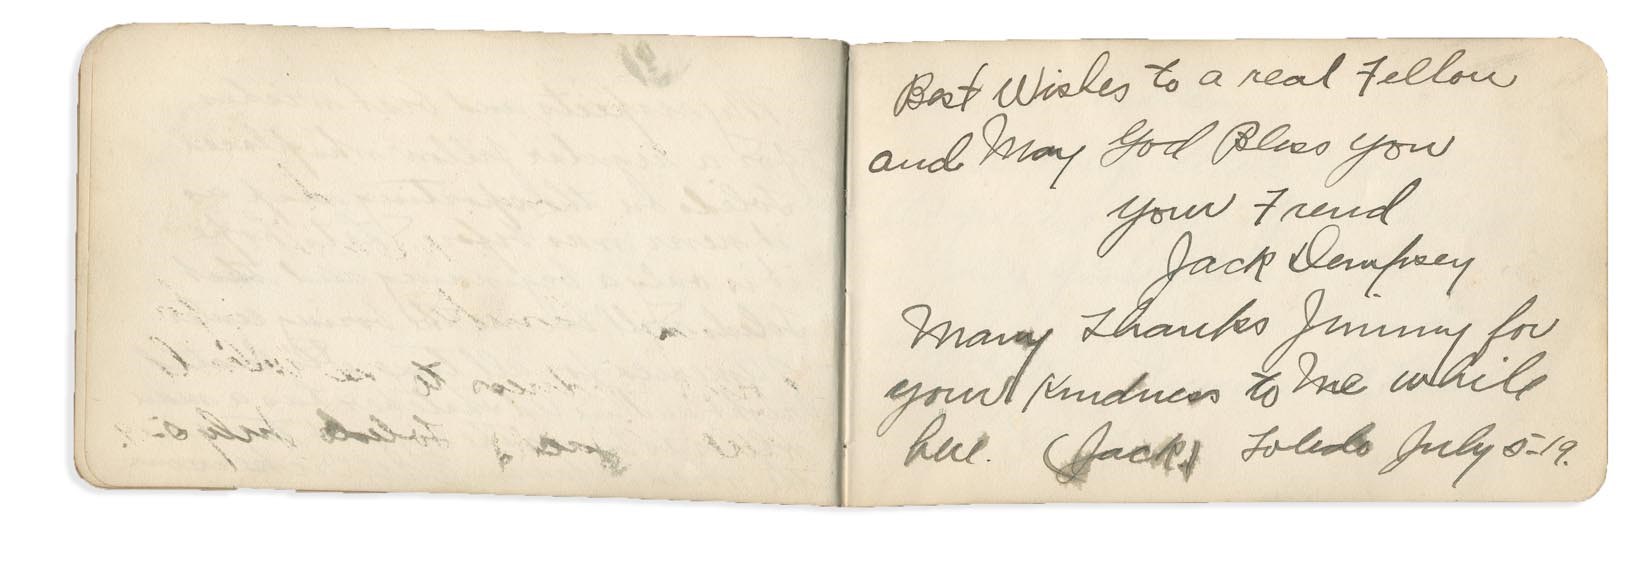 Muhammad Ali & Boxing - The First Known Autograph Signed by Jack Dempsey as World's Champion